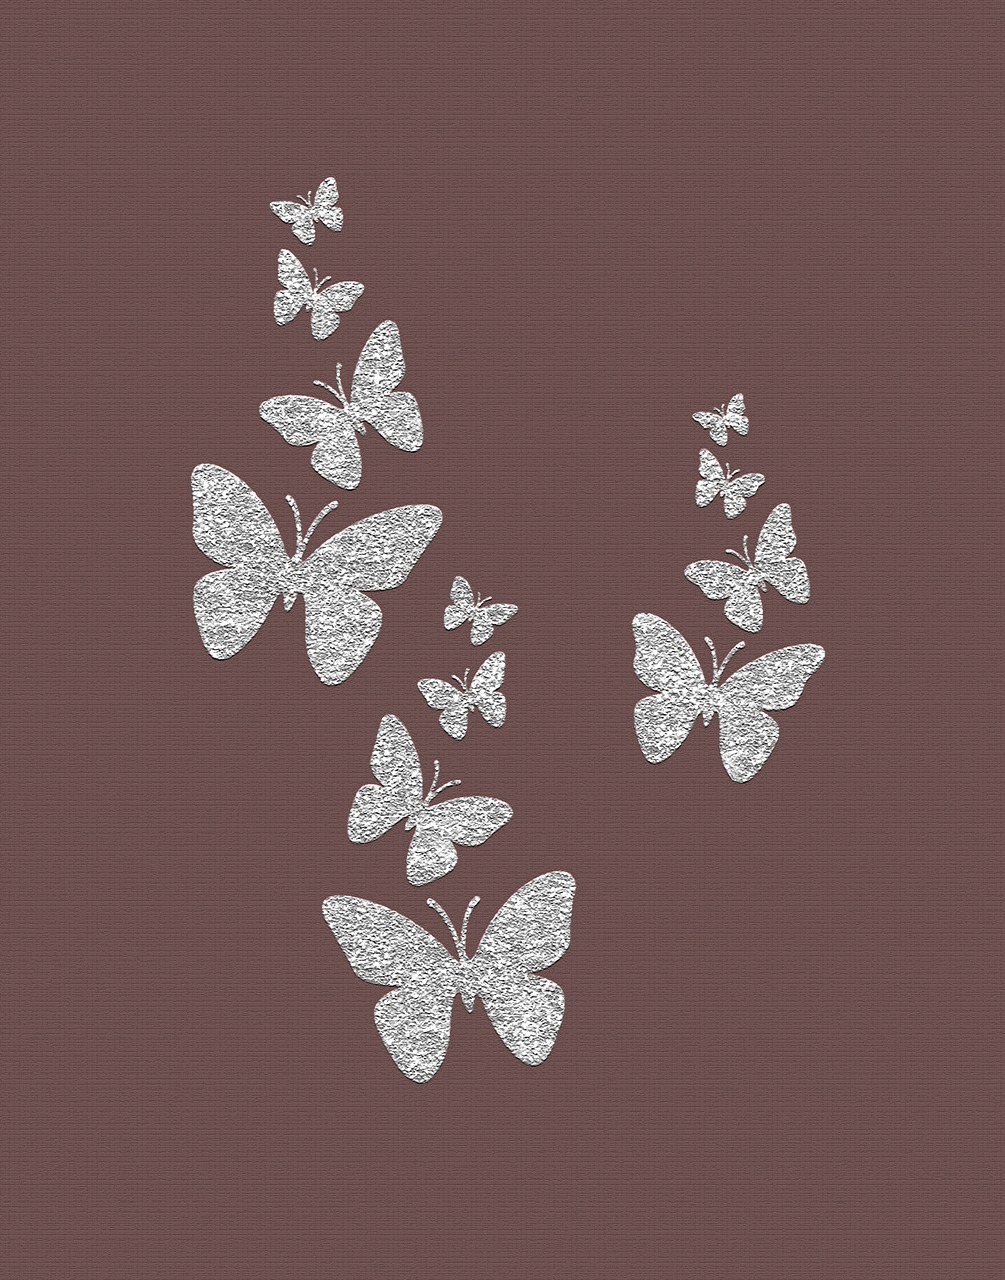 butterflies nature silver free photo